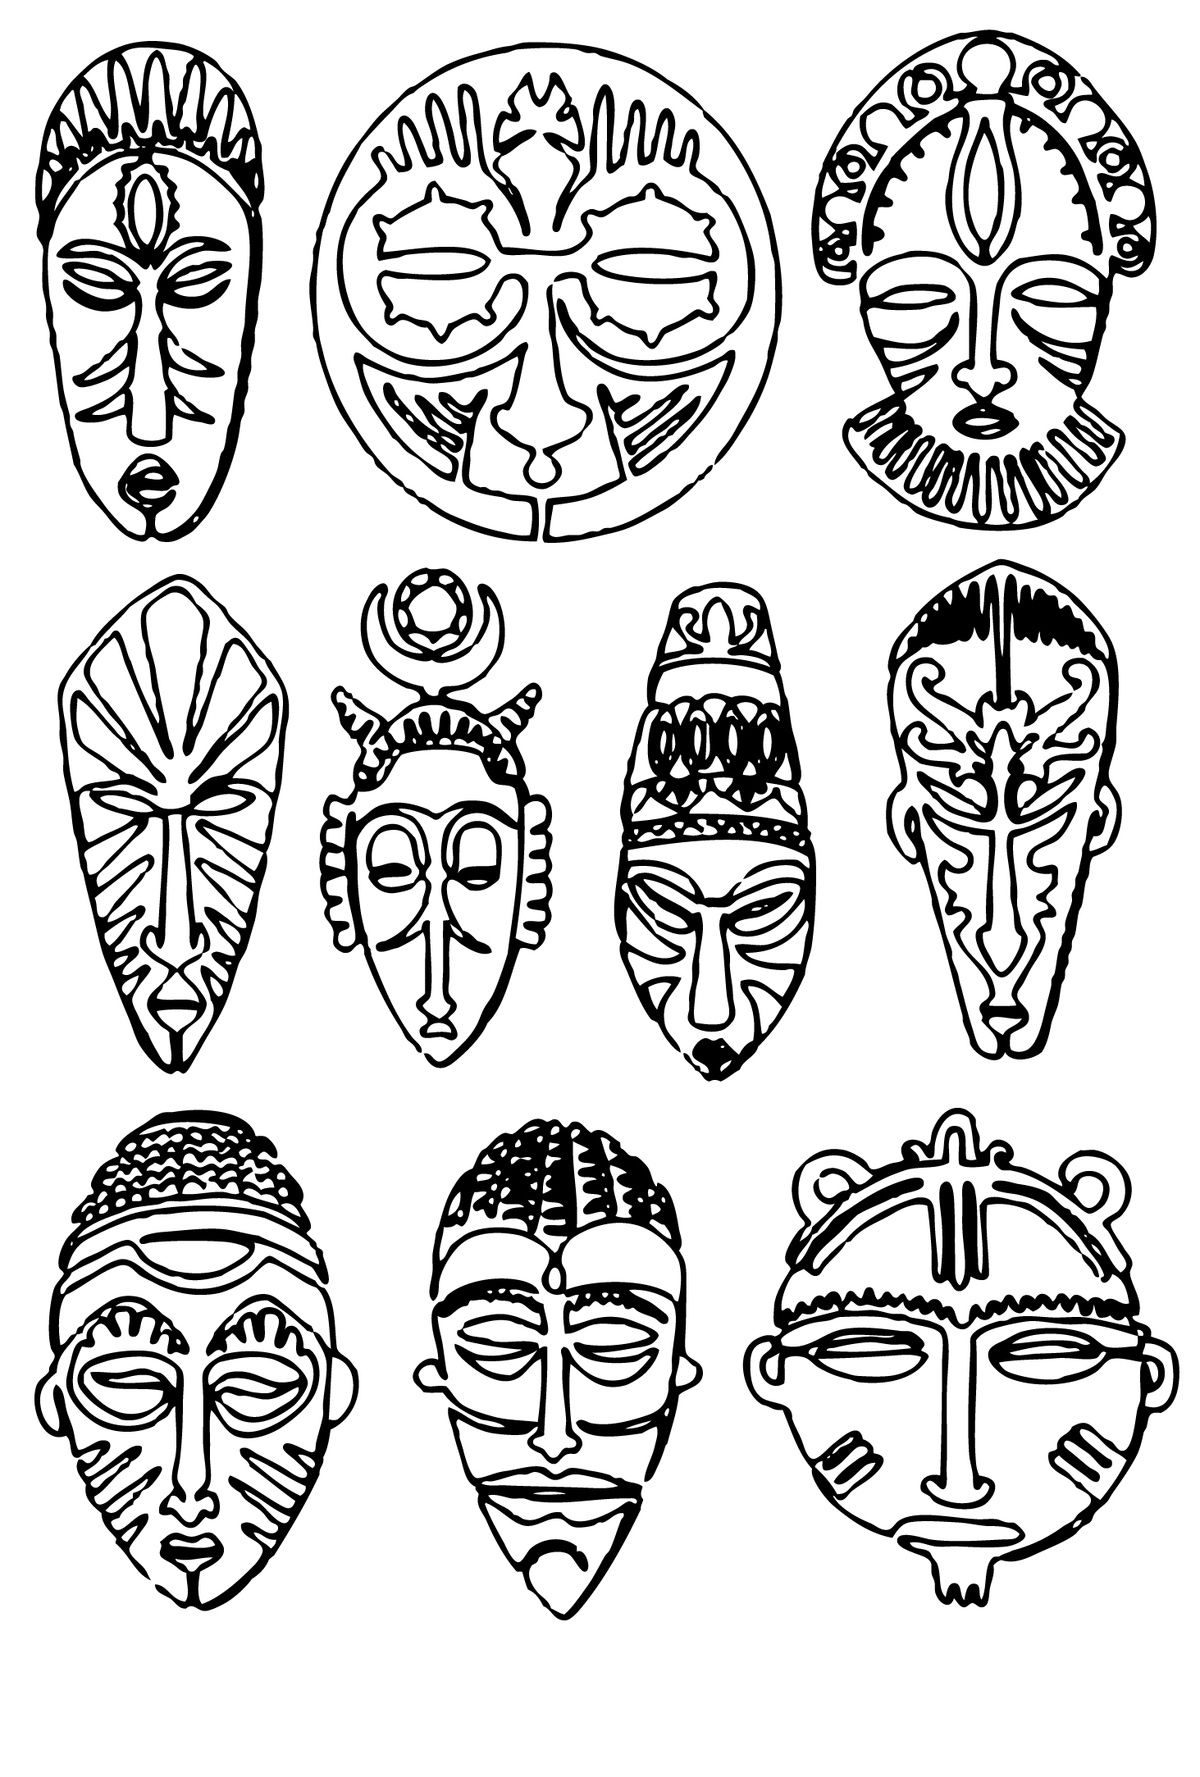 African Masks Inspiration  African Art Projects, Africa Art, African Masks pour Coloriage Masque Africain